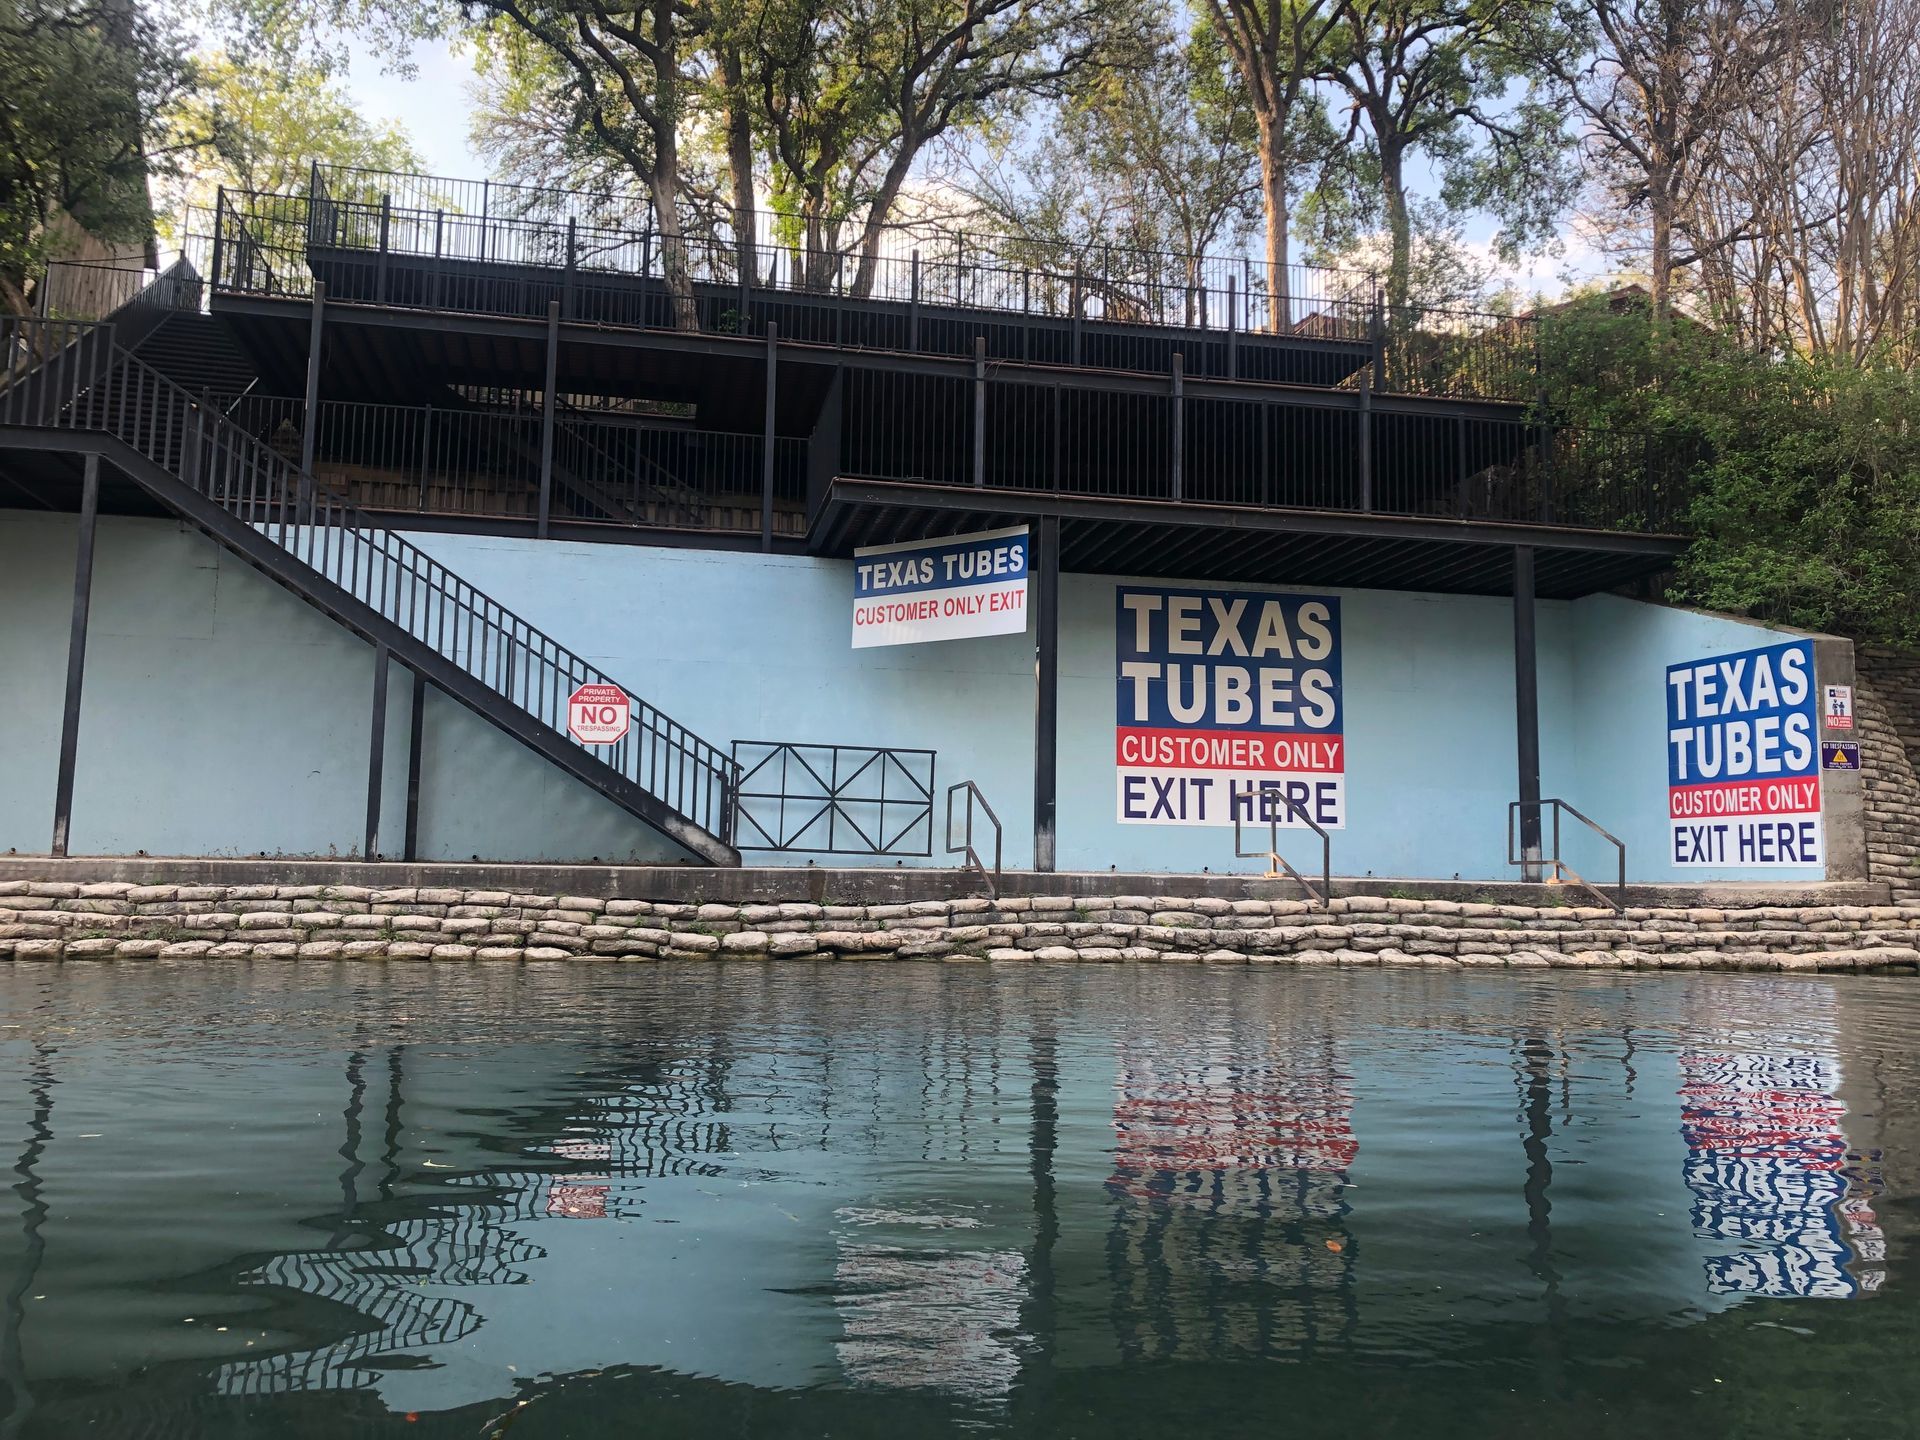 This is Texas Tubes' Private Comal River Float Trip EXIT for ALL Texas Tubes customers! EXIT HERE to catch your Shuttle ride back to Texas Tubes! New Braunfels